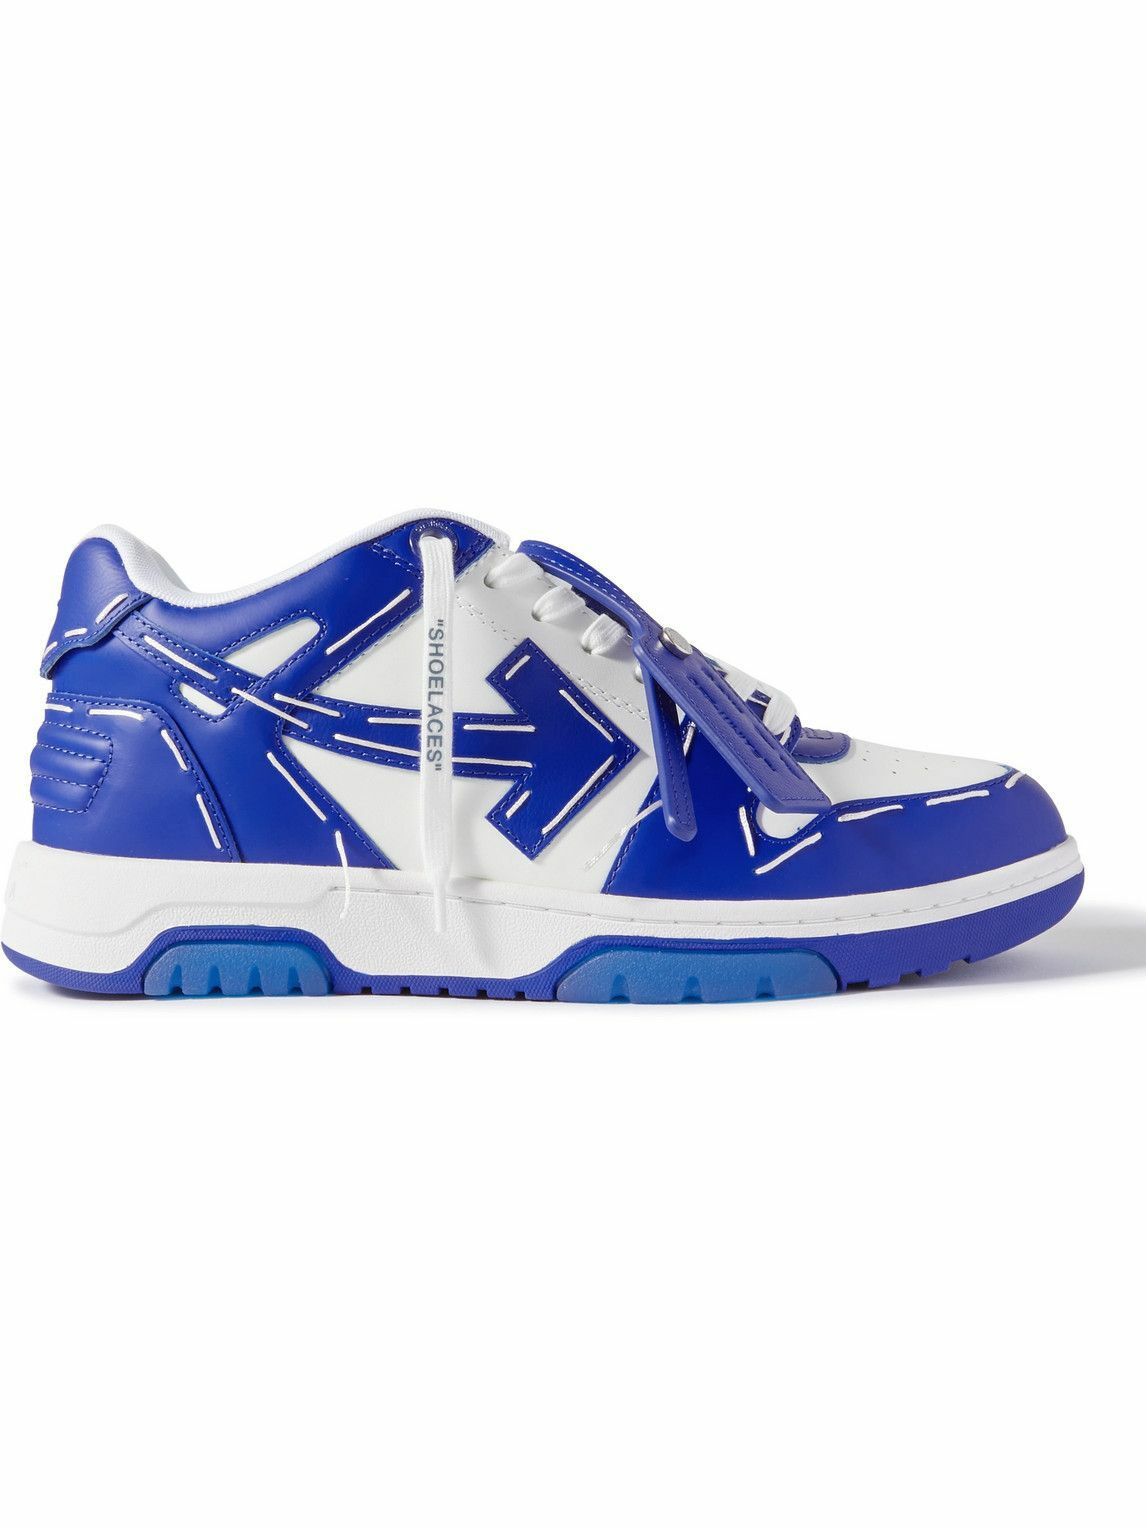 Off-White - Out of Office Topstitched Leather Sneakers - Blue Off-White